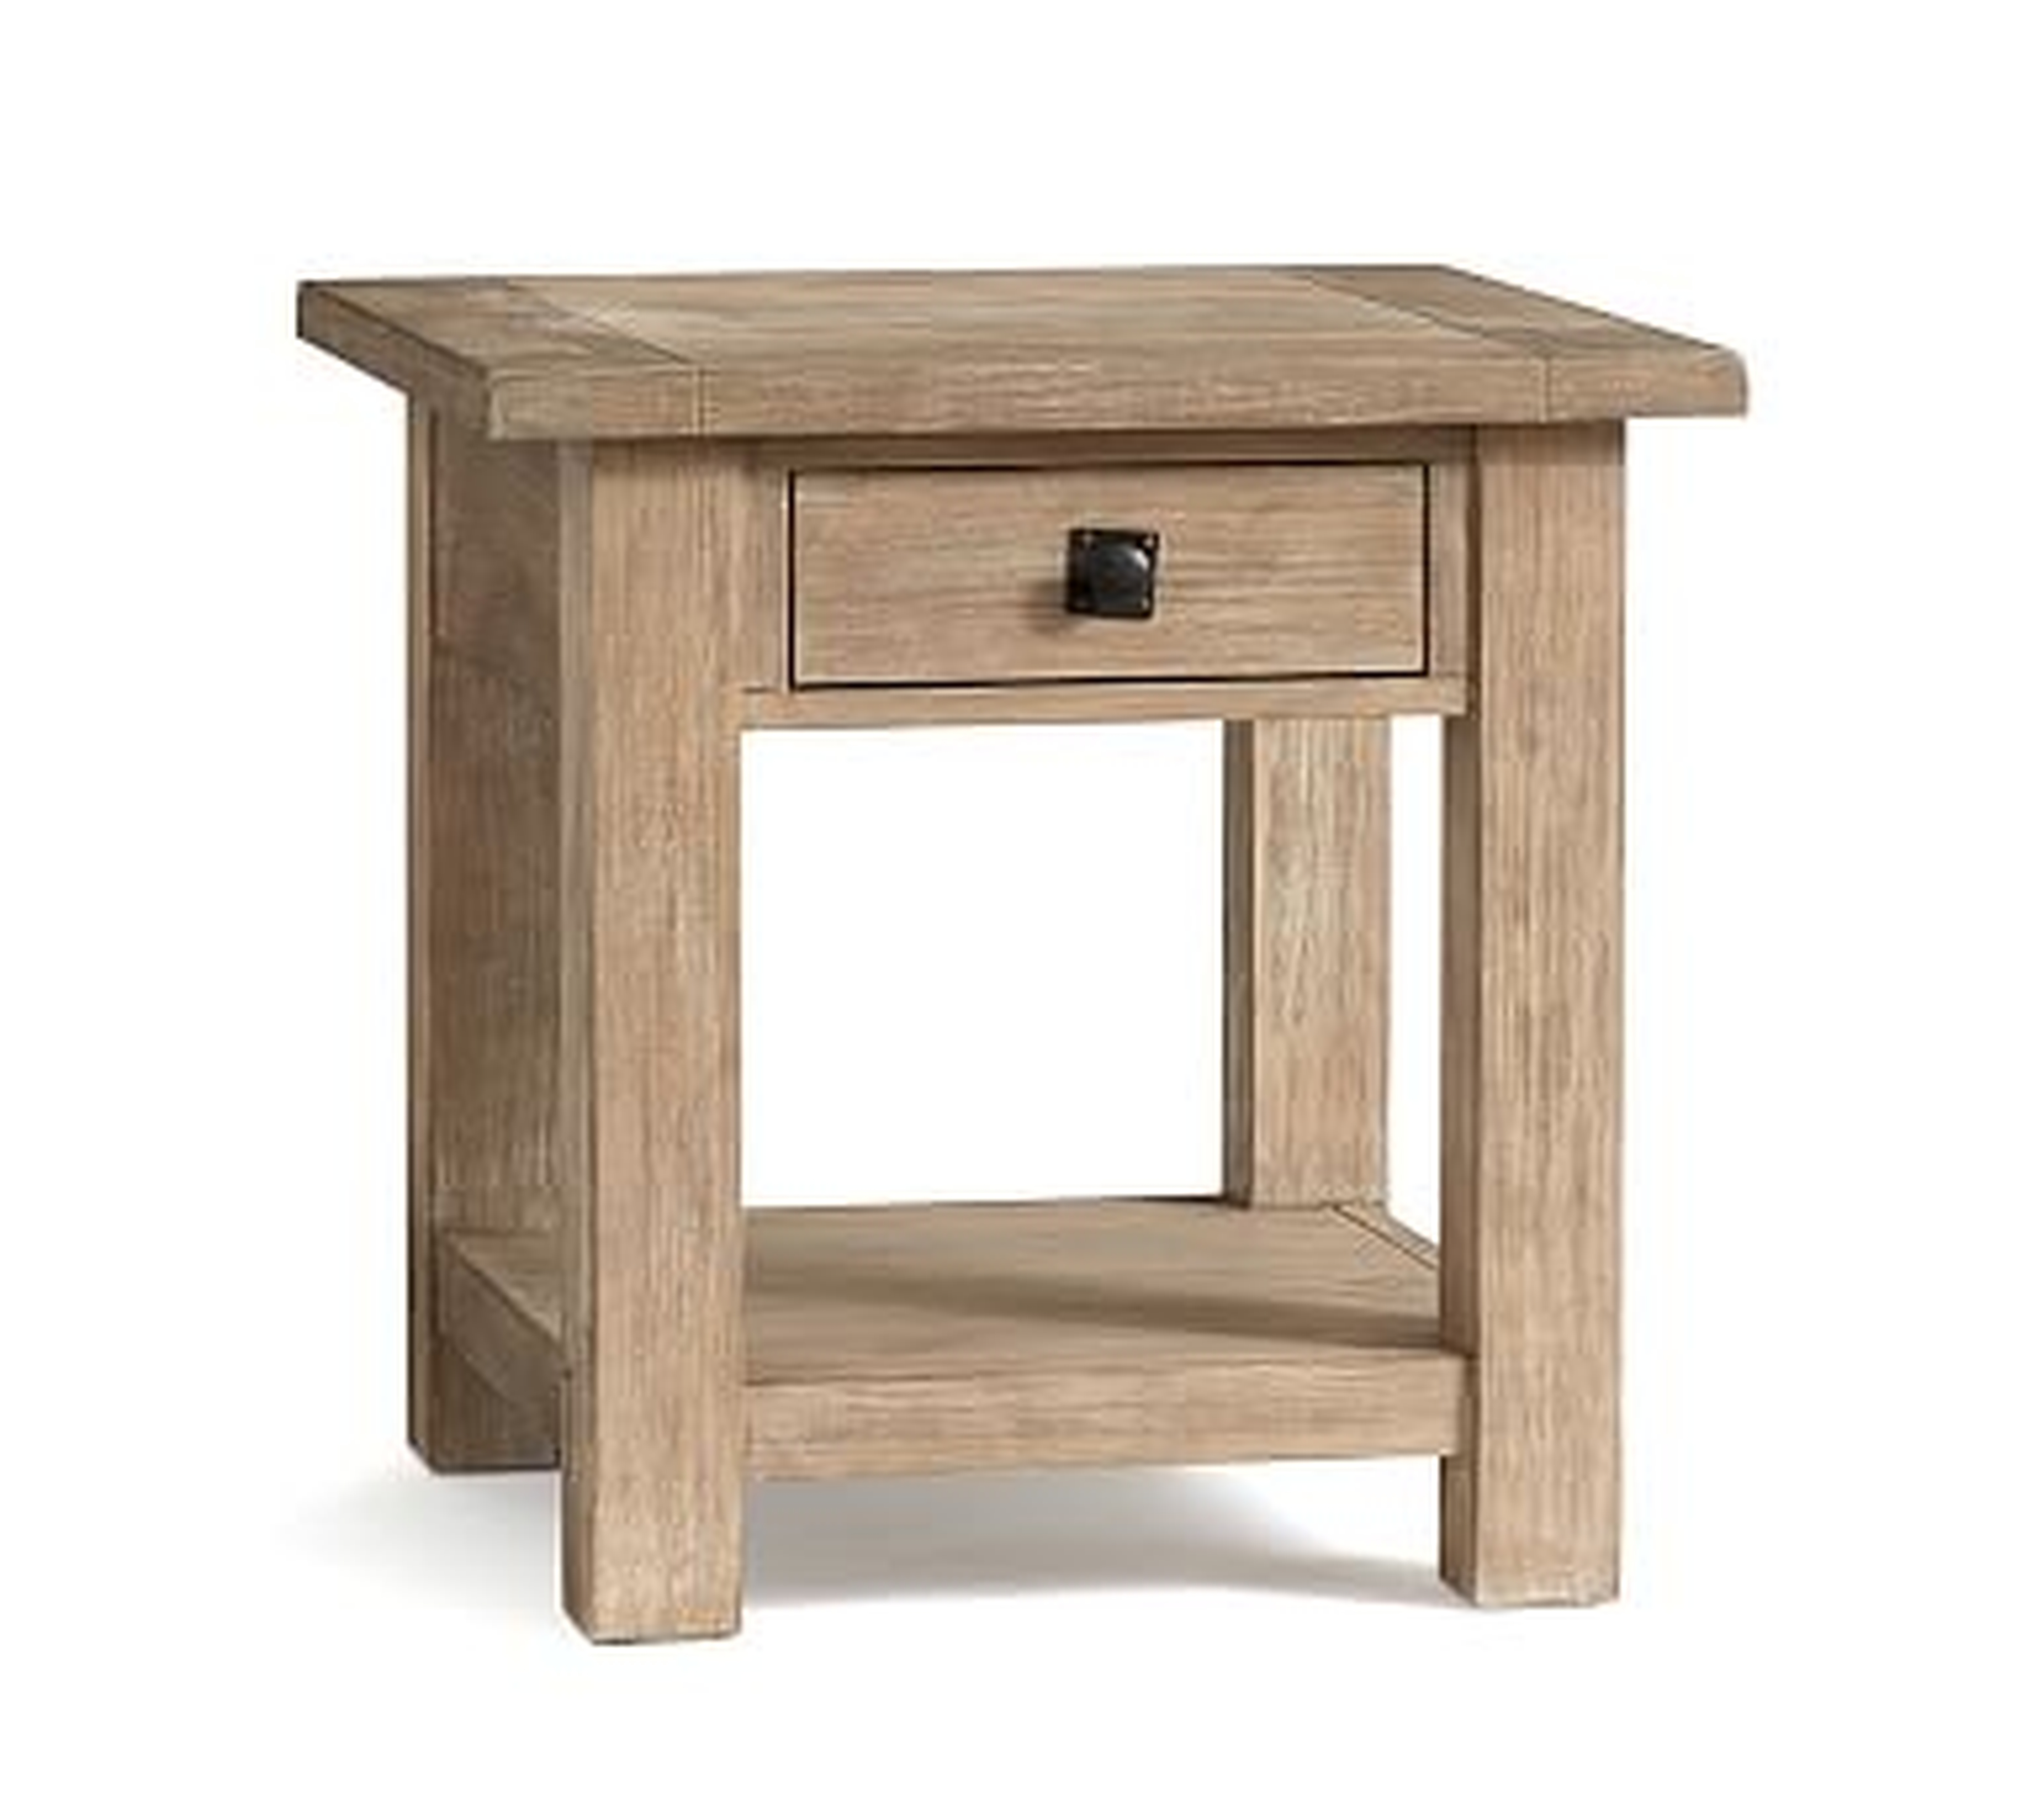 Benchwright Square Wood End Table with Drawer, Seadrift - Pottery Barn